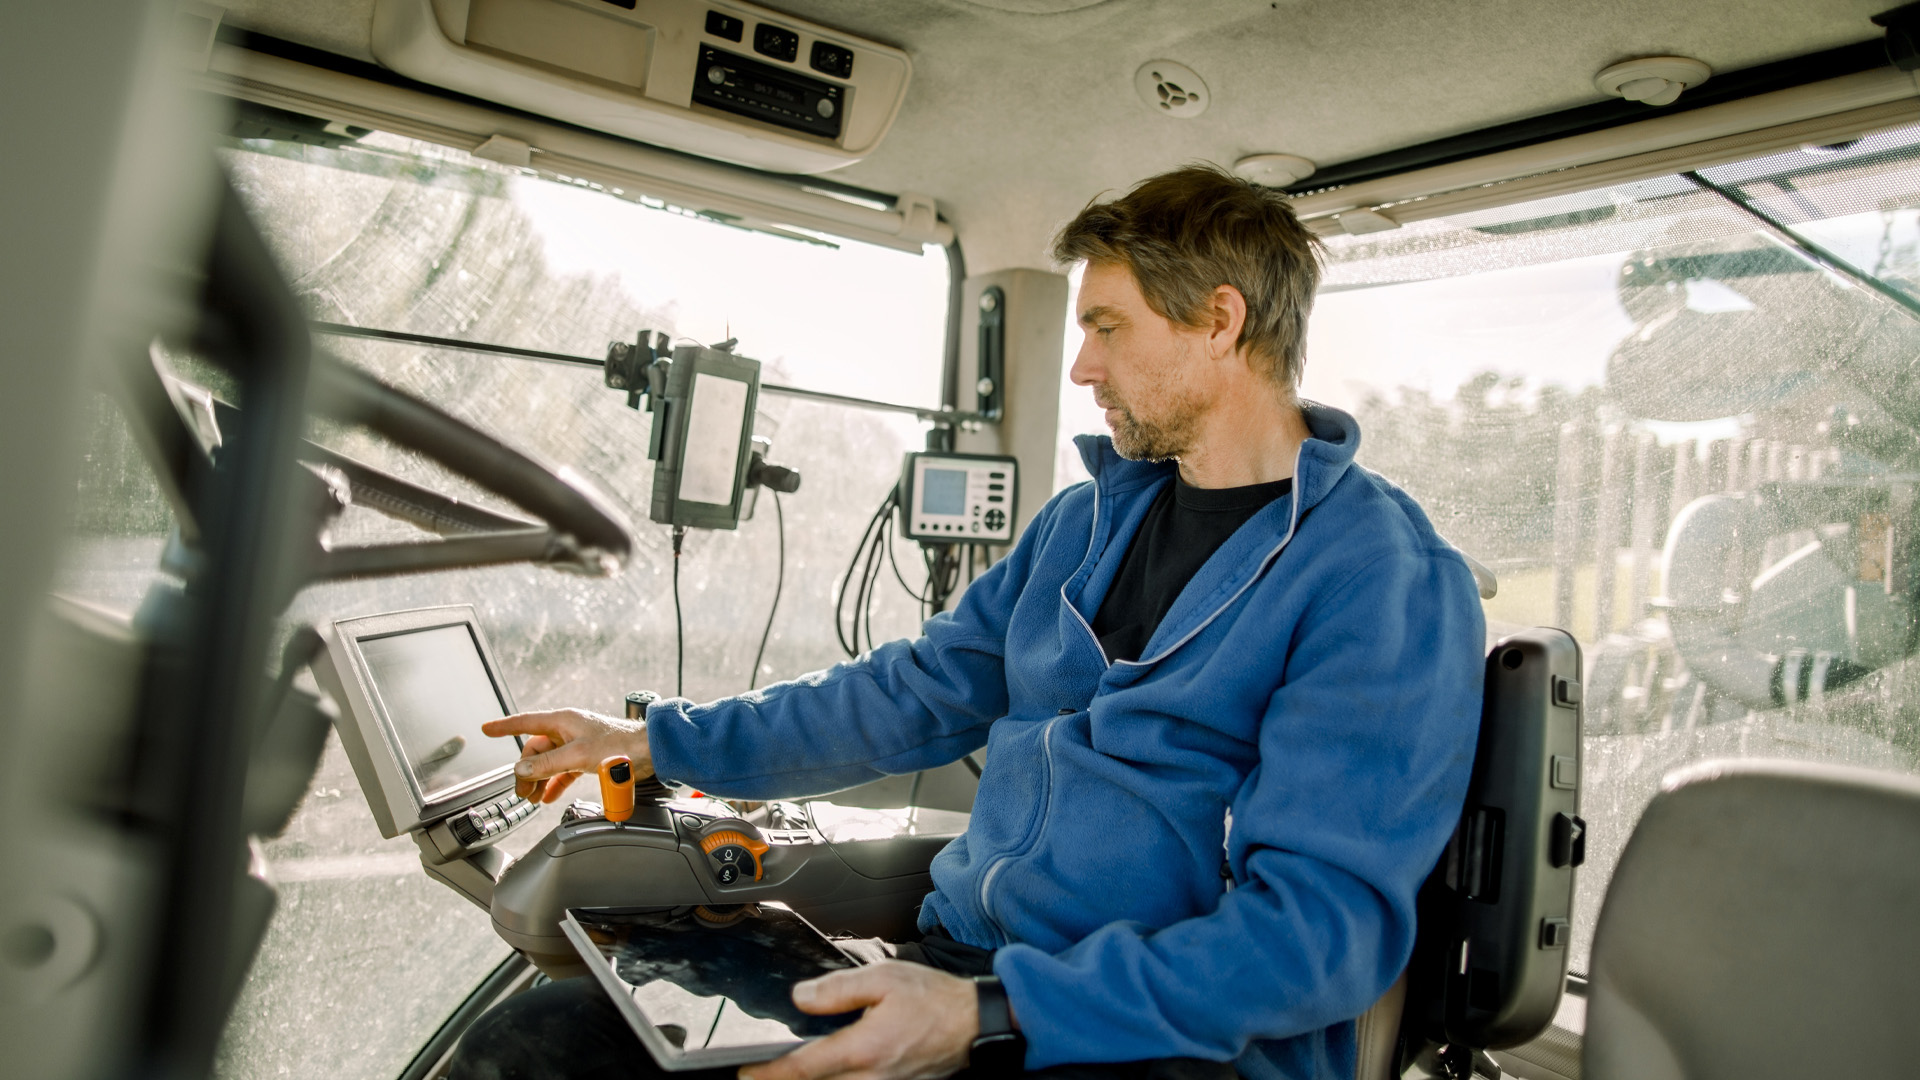 Man sitting in farm equipment operating touchscreen while holding another tablet device